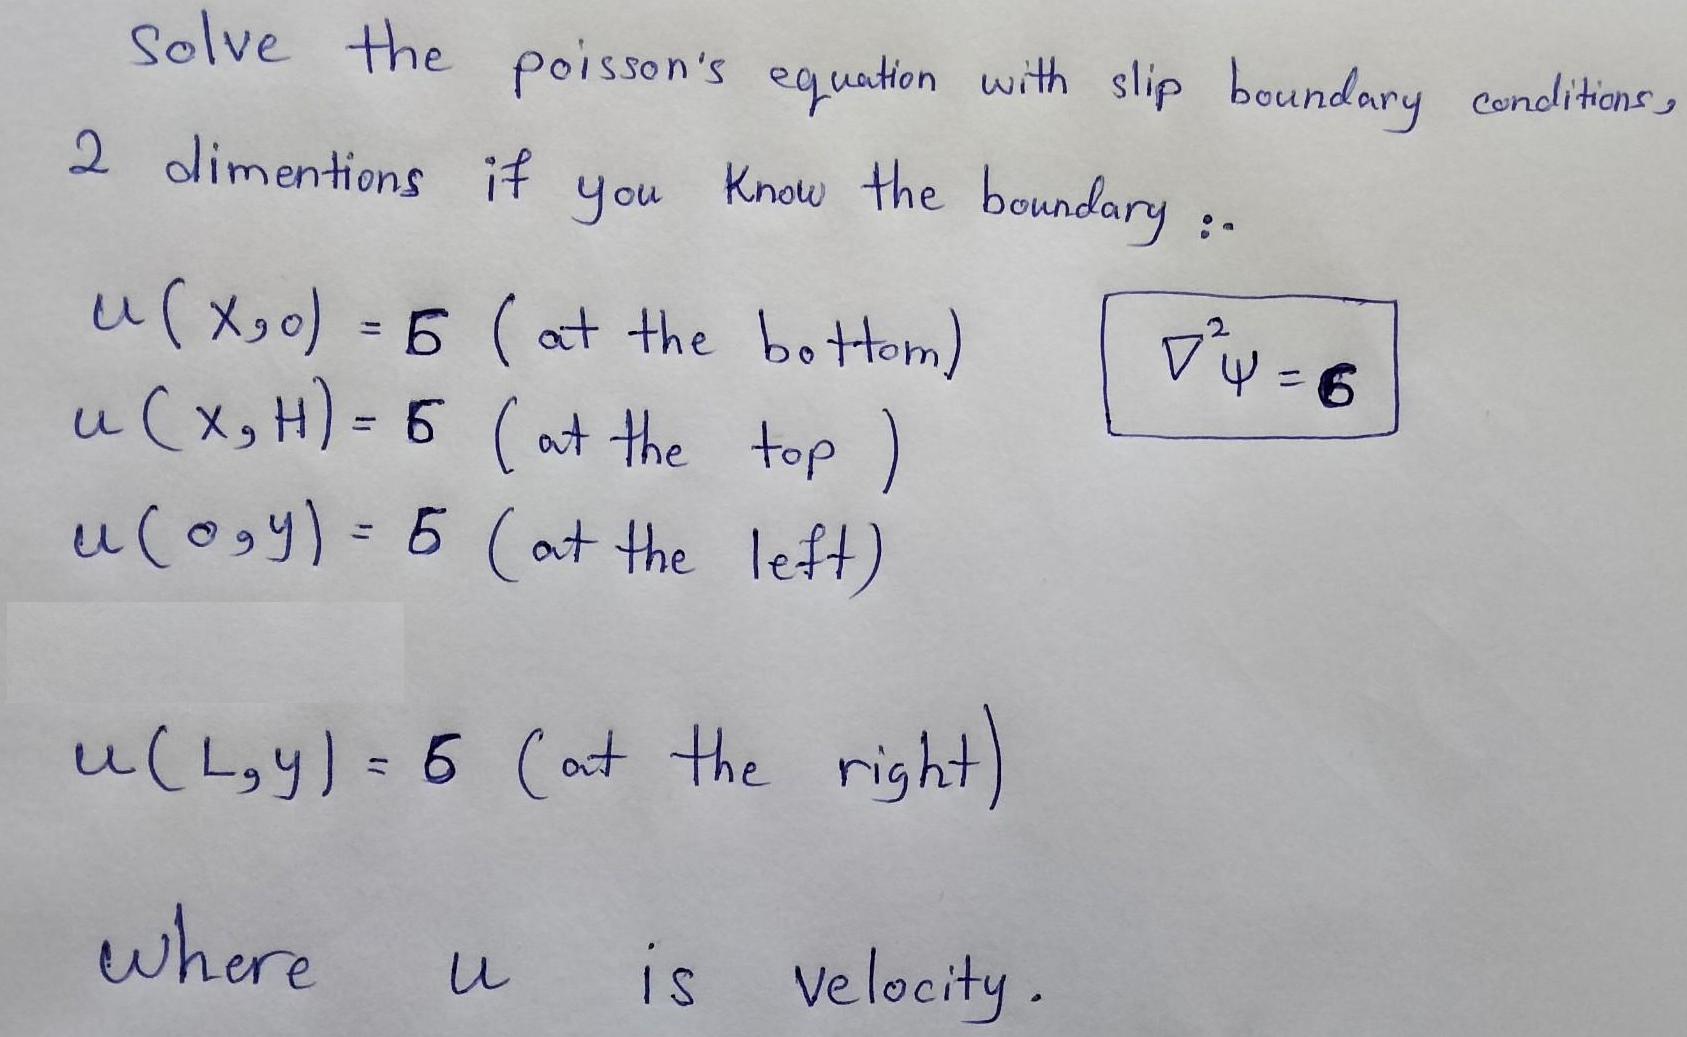 Solve the poisson's equation with slip boundary conditions, Know the boundary :. 4 = 6 2 dimentions if you u